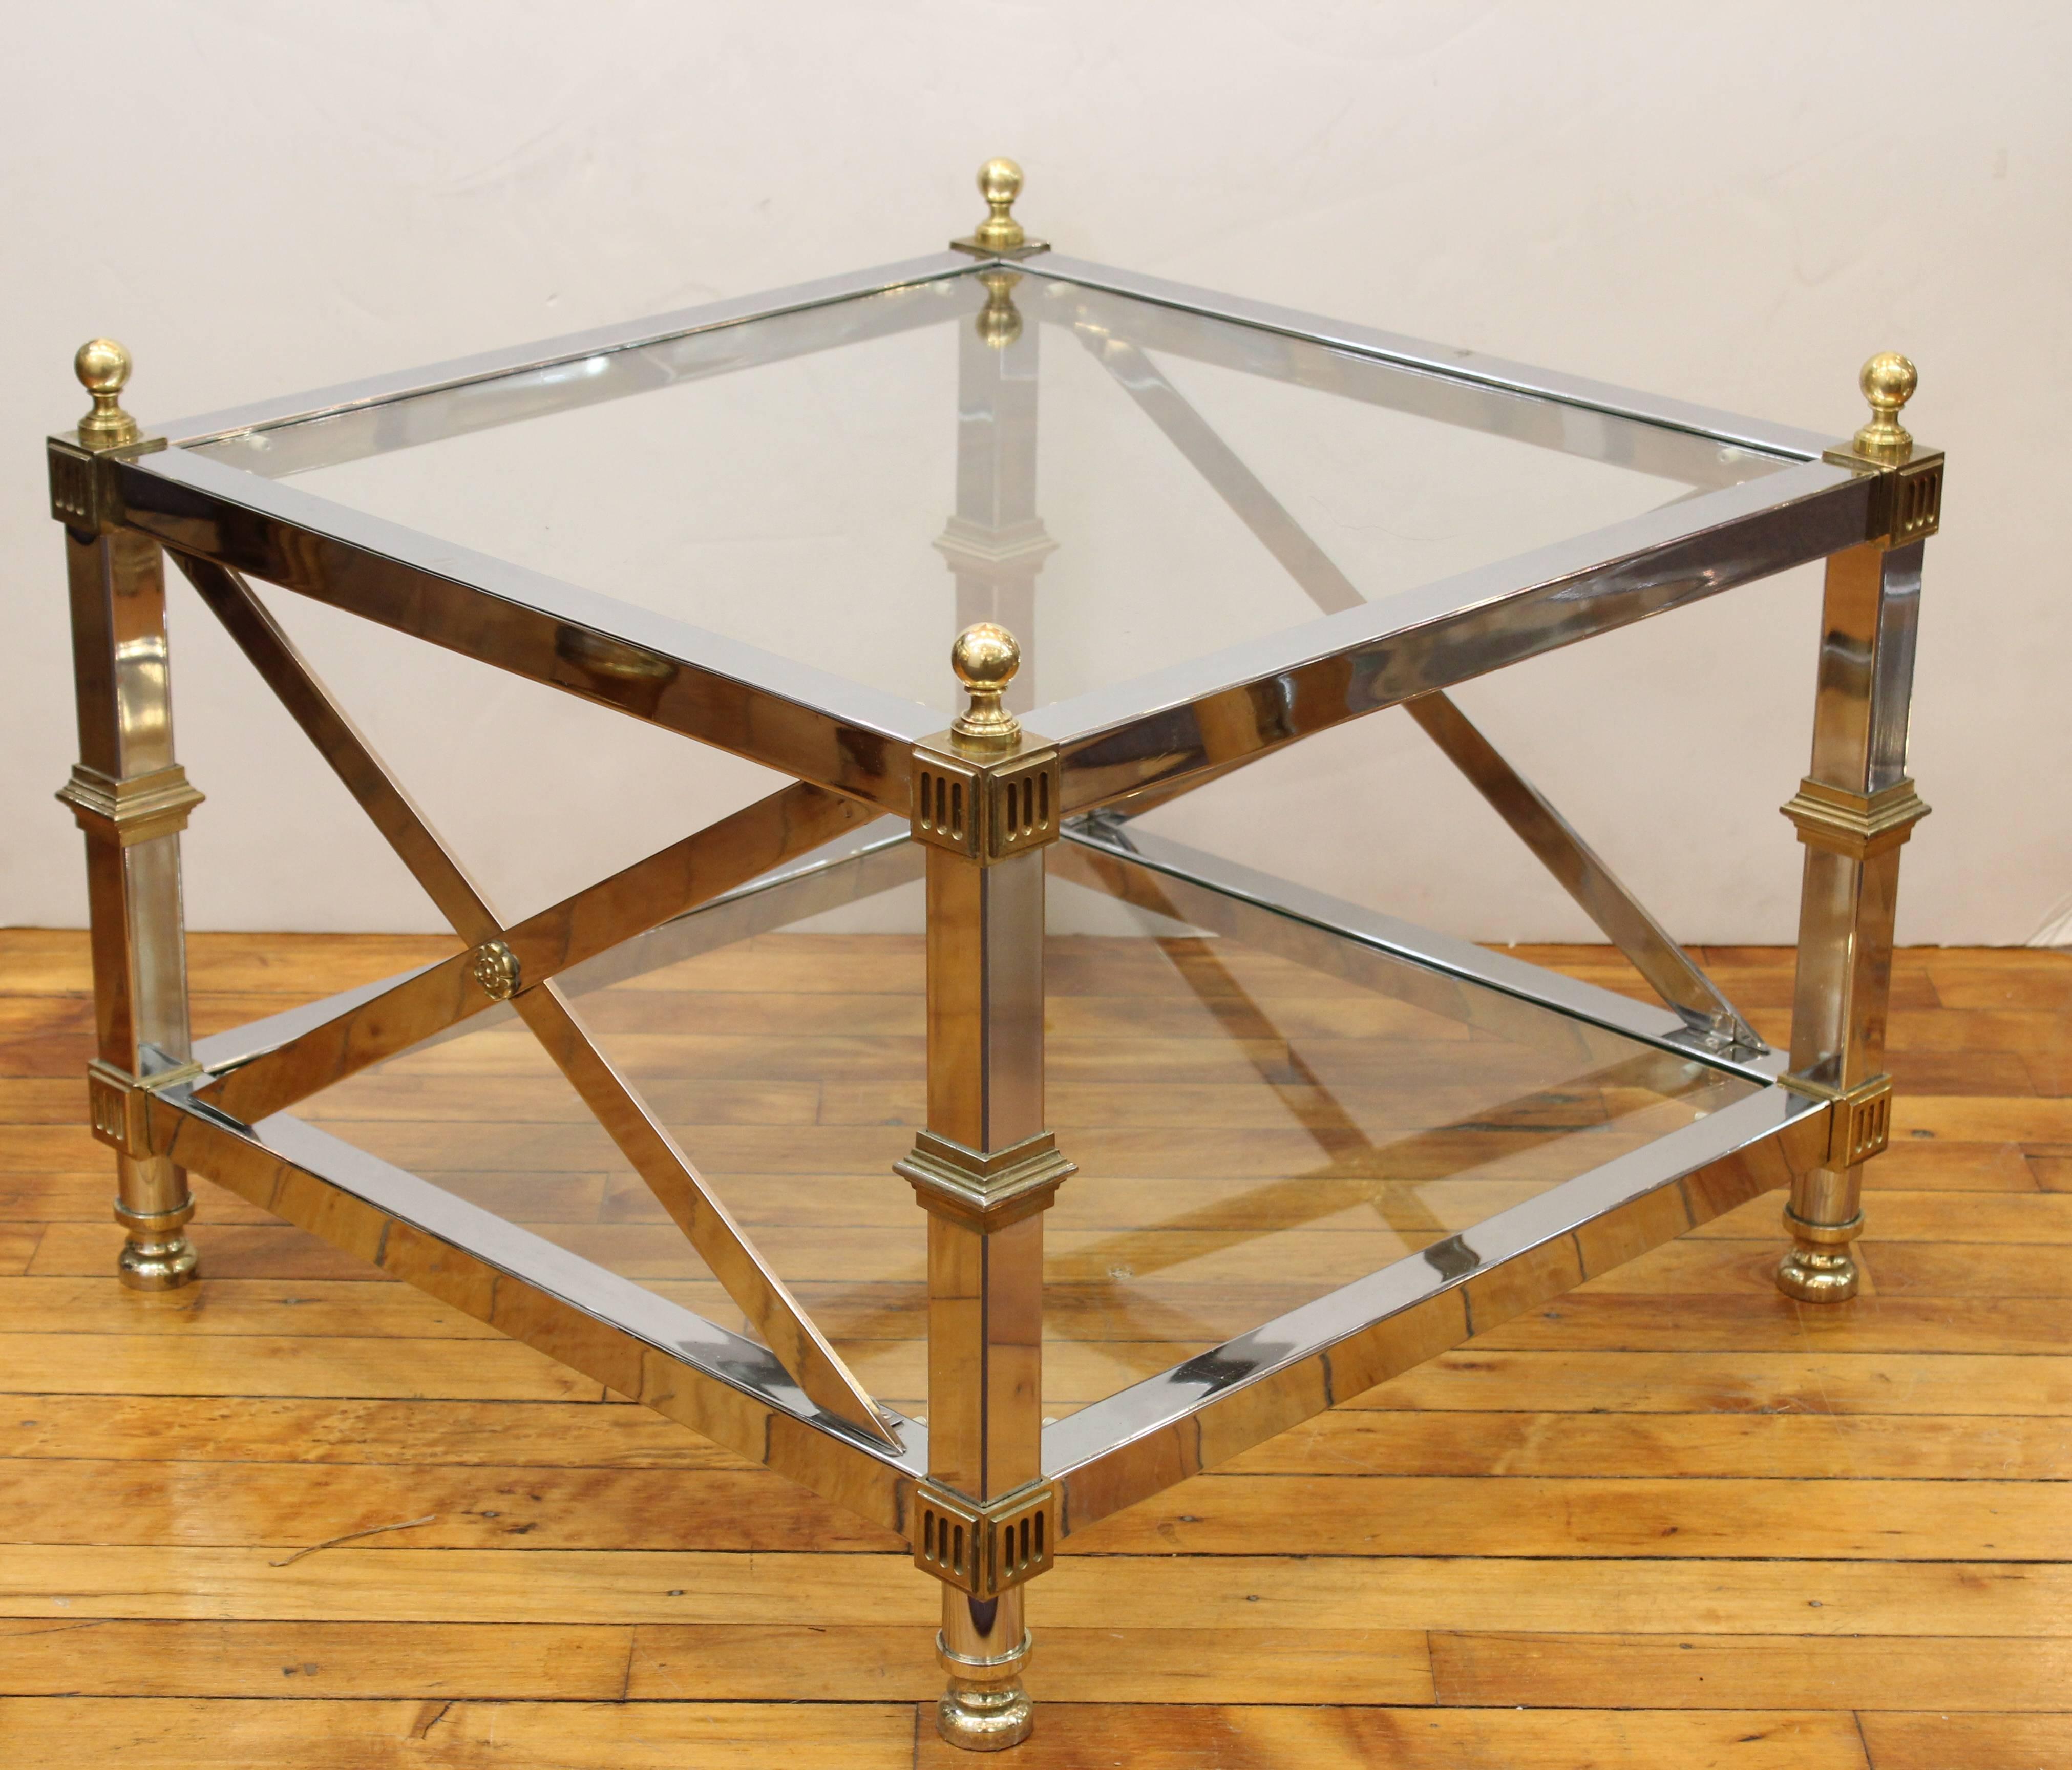 A pair of Maison Jansen chrome, glass and brass coffee tables, in the French Directoire style with decorative rosettes, made in the 1950s in France. In very good condition.